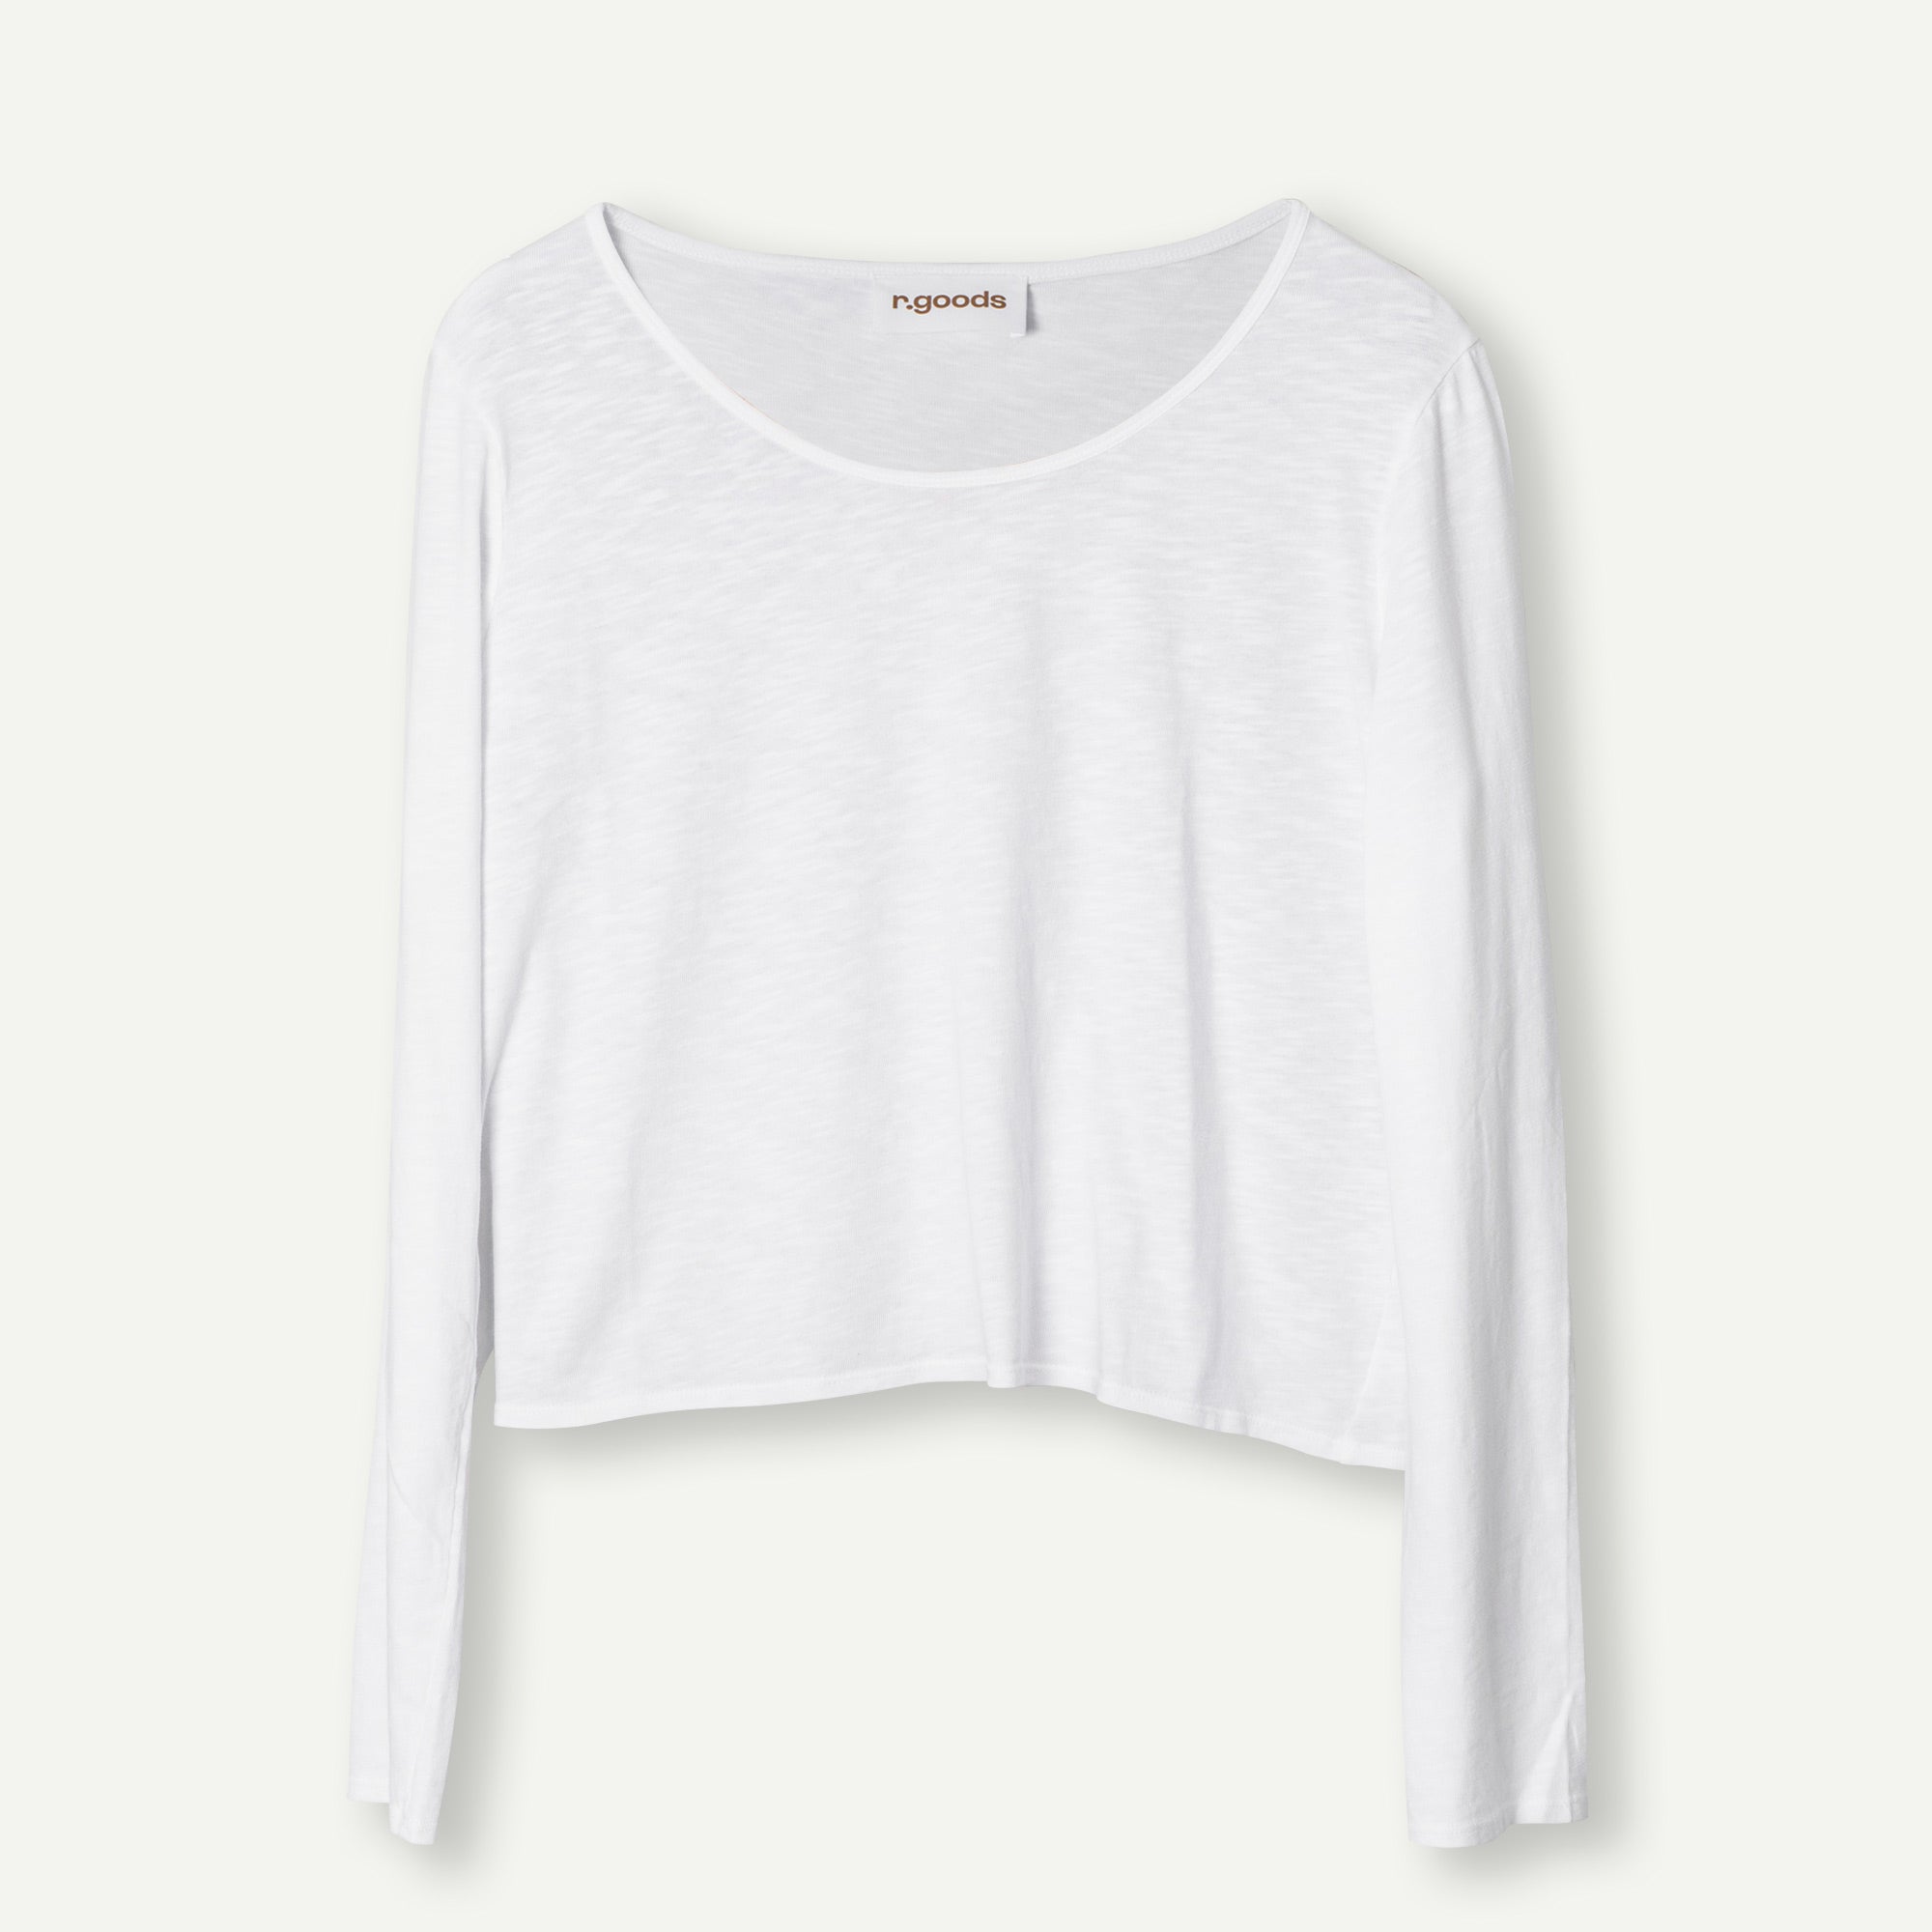 R.Goods White Lucy Long Sleeve Tee